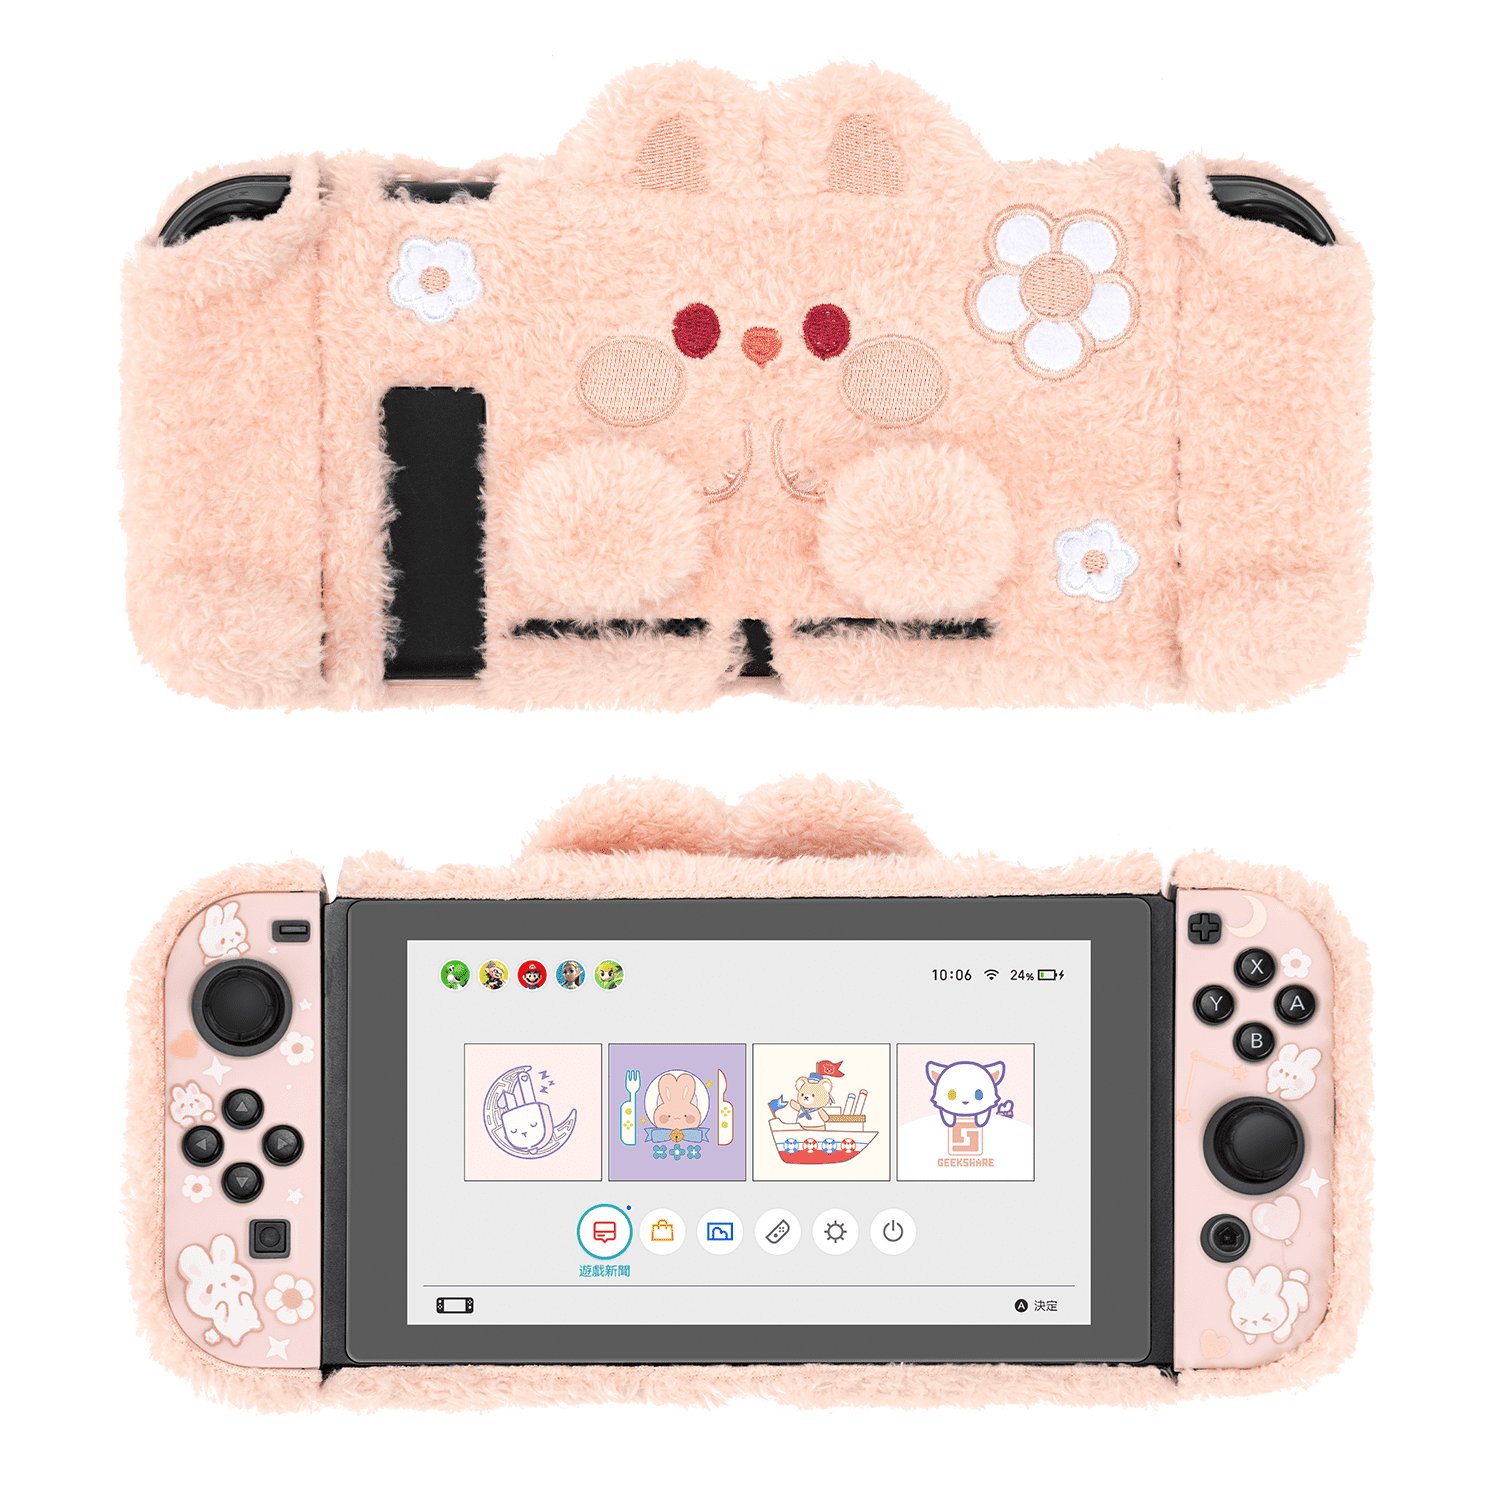 GeekShare Plush Bunny Protective Case for Nintendo Switch OLED